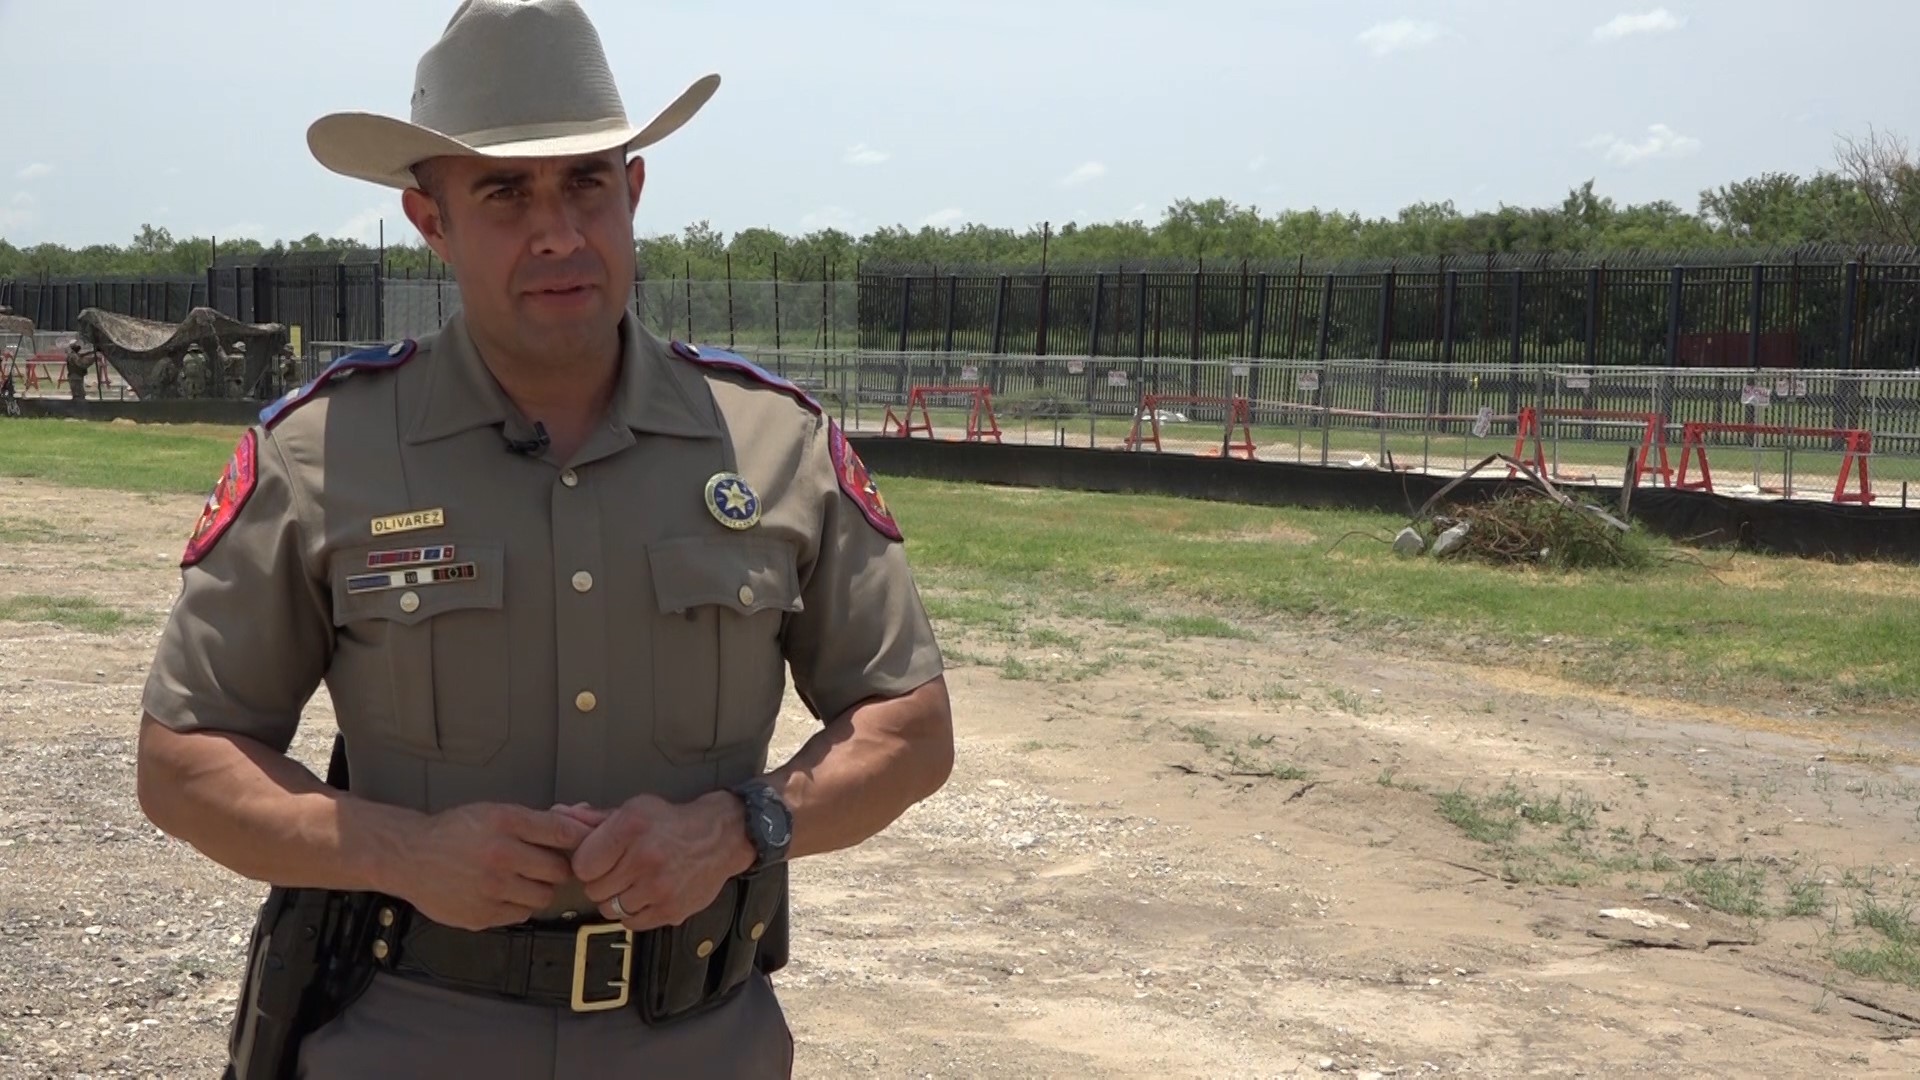 "So the out-of-state troopers, they can't enforce Texas laws. They're working under the umbrella of Texas DPS," said Lt. Christopher Olivarez with Texas DPS.